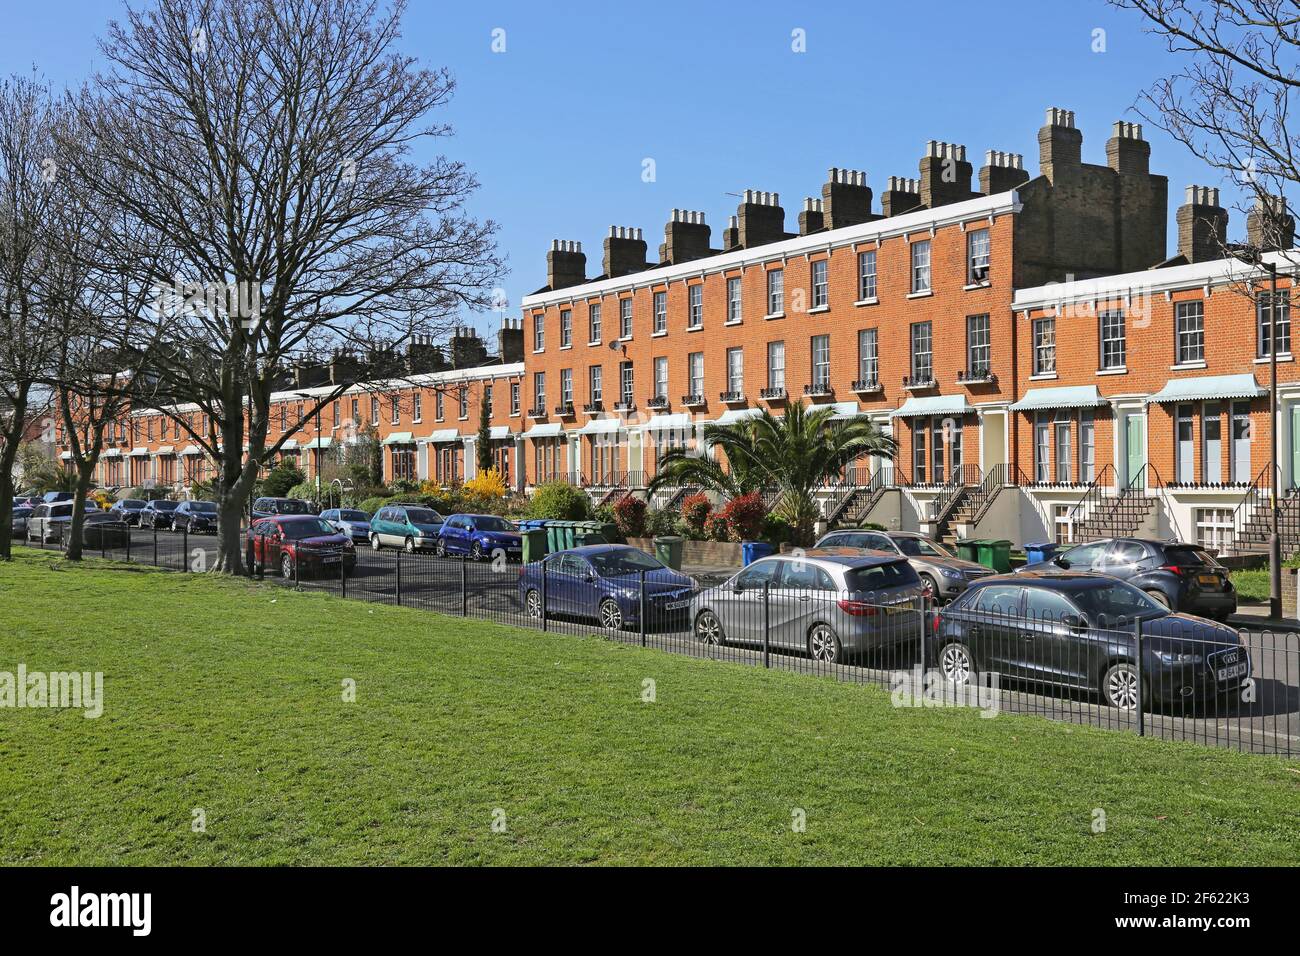 Clifton Crescent, Peckham, London, UK. A famous row of Regency period Victorian terrace houses. Threatened with demolition in the 1970s - now listed. Stock Photo